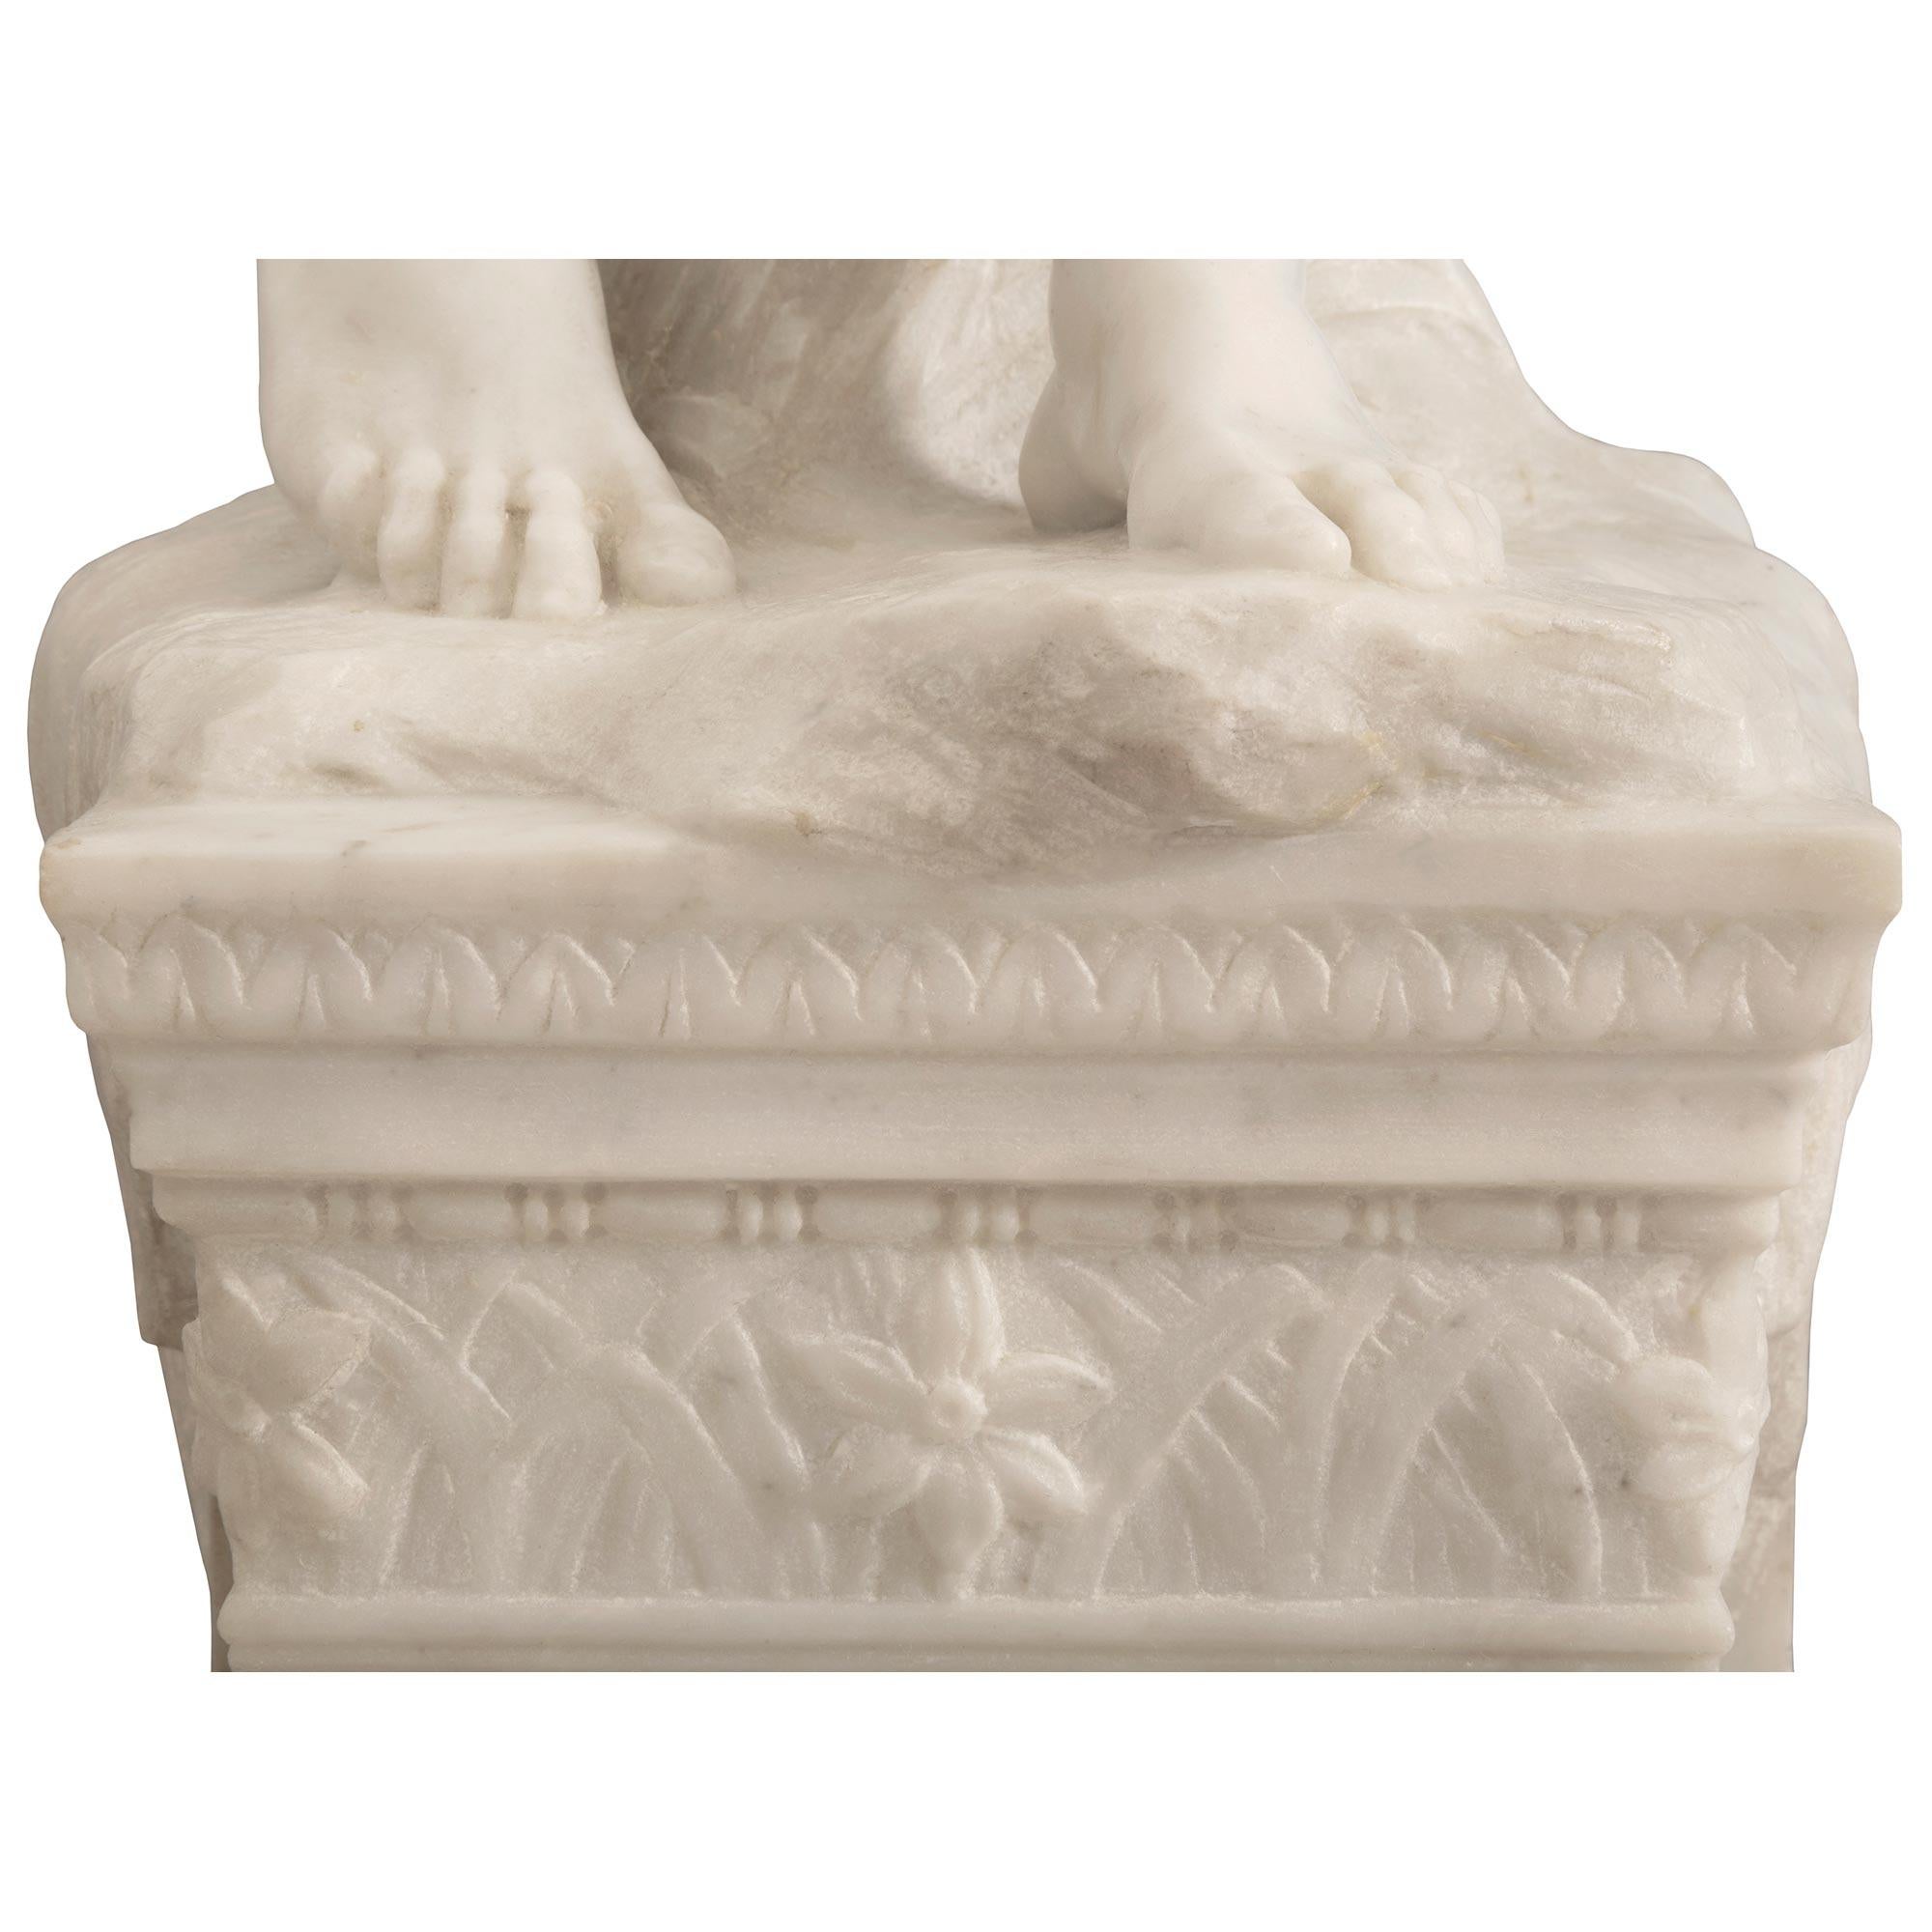 French 19th Century Solid White Carrara Marble Statue/Basin For Sale 6